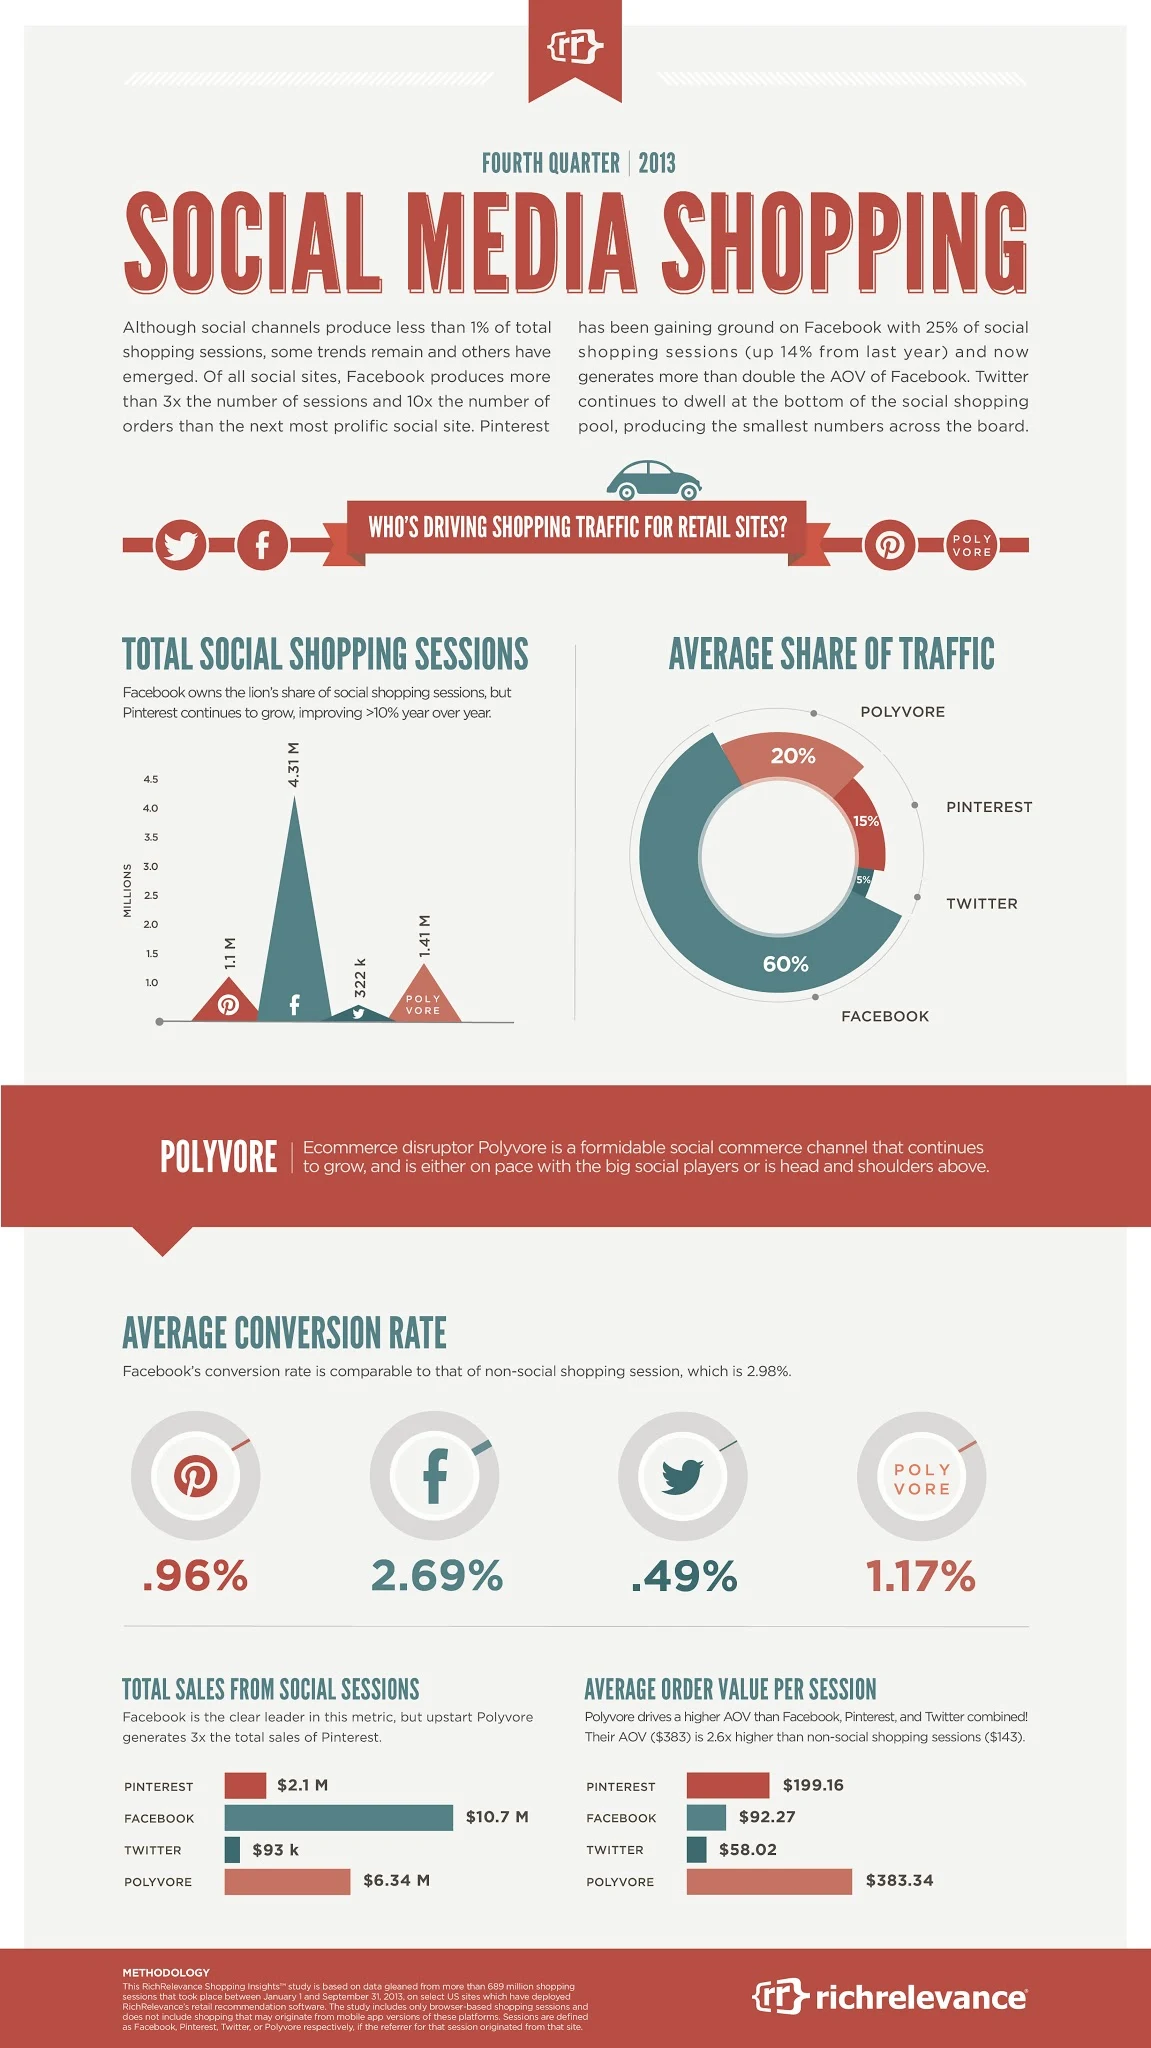 Social Media Shopping - Facebook Twitter or Pinterest Who's Driving Shopping Traffic For Retail Sites [Infographic]